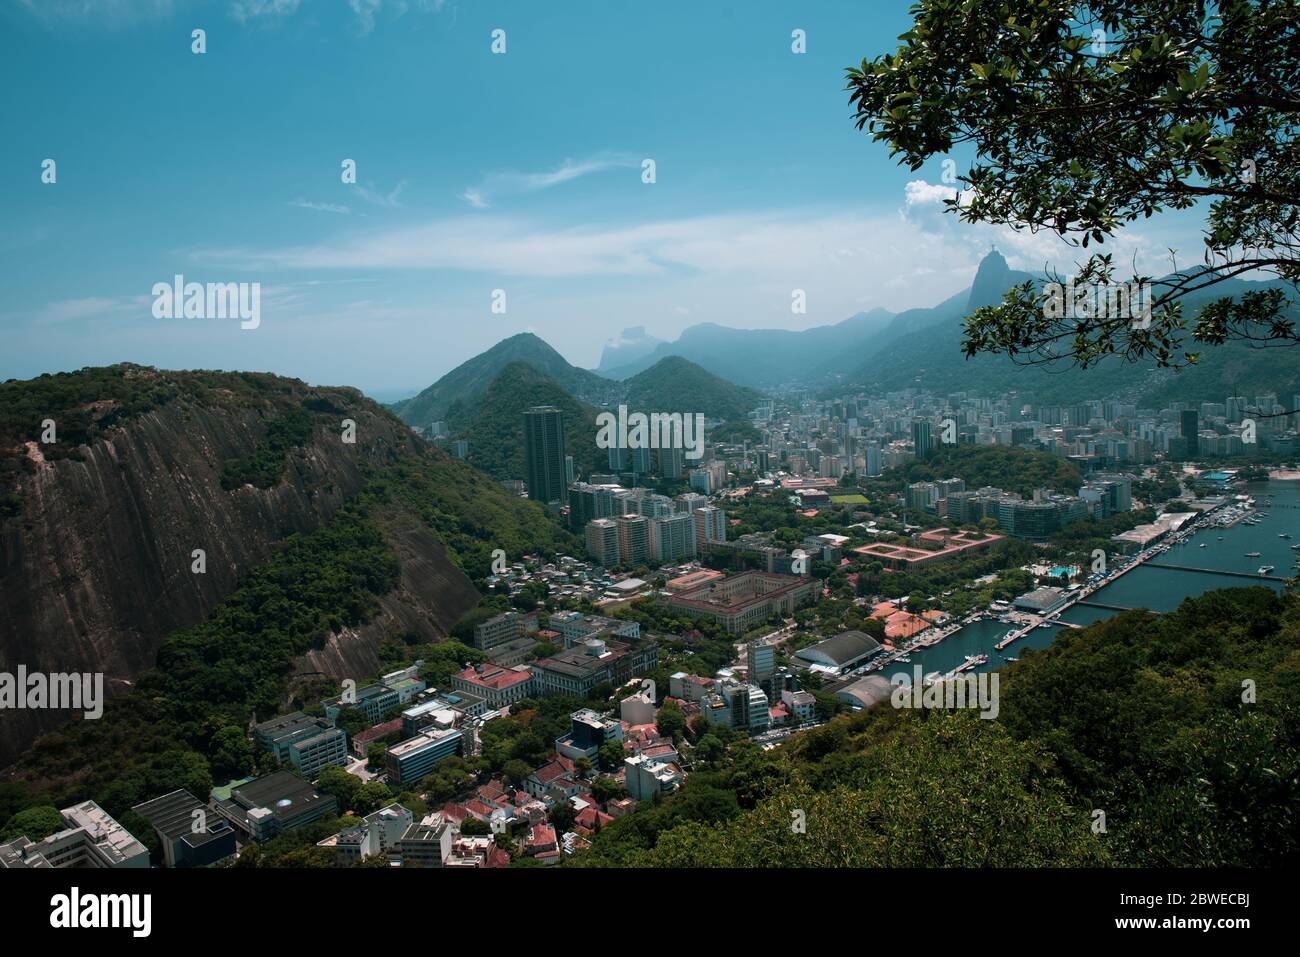 View of the Sugar Loaf in Botafogo, a mountain, and a landscape of Rio de Janeiro from a cable car, Brazil. Stock Photo